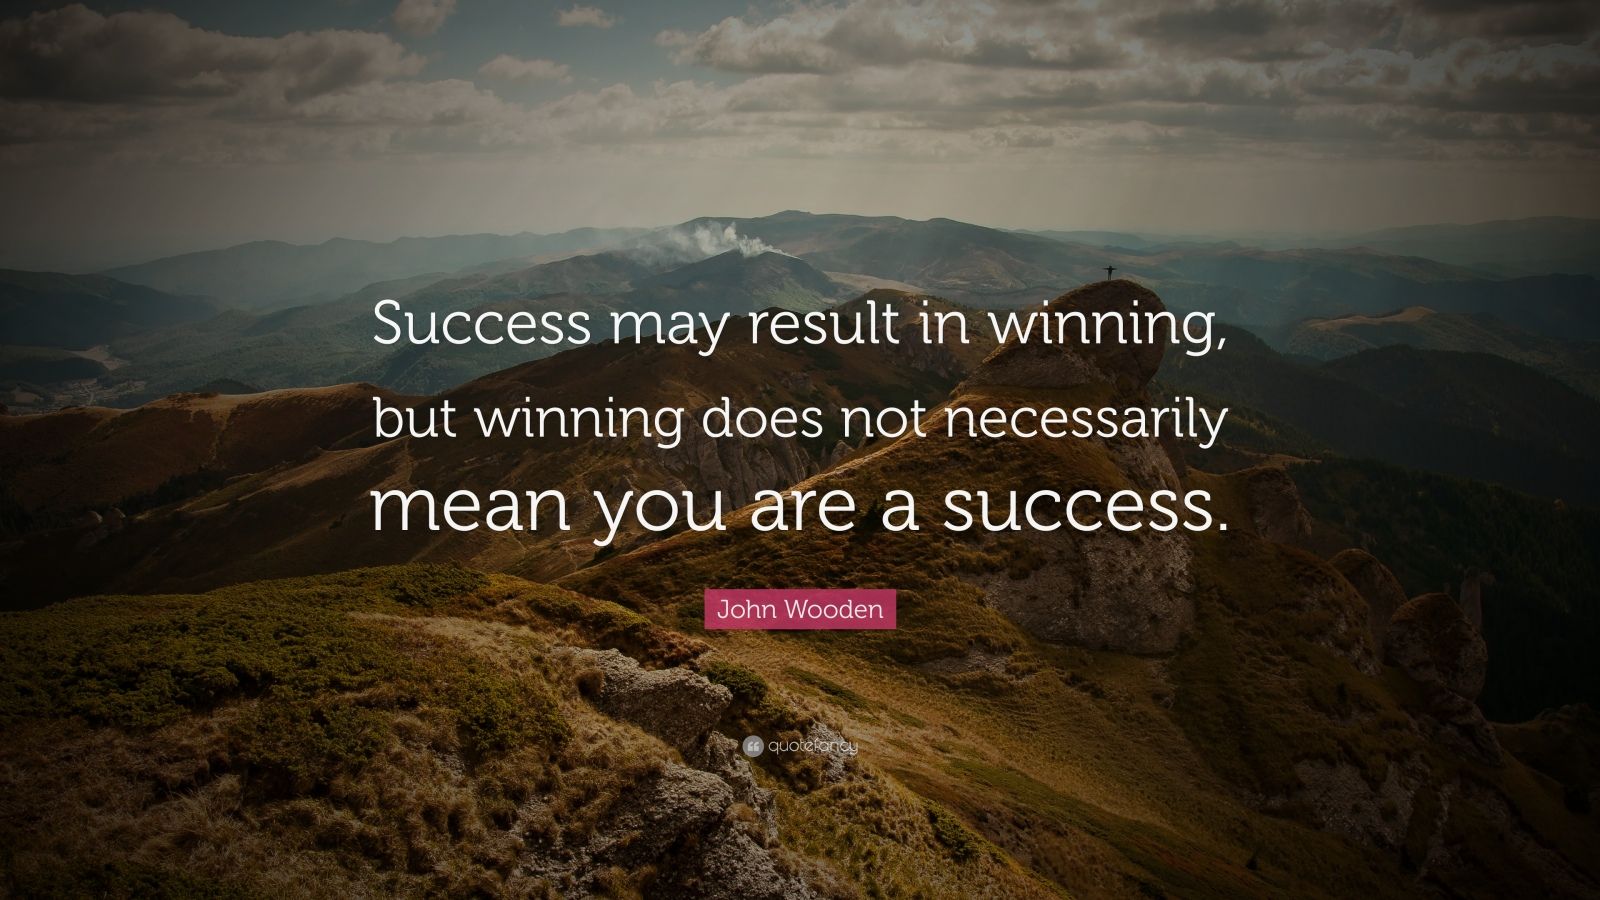 John Wooden Quote: “Success may result in winning, but winning does not ...